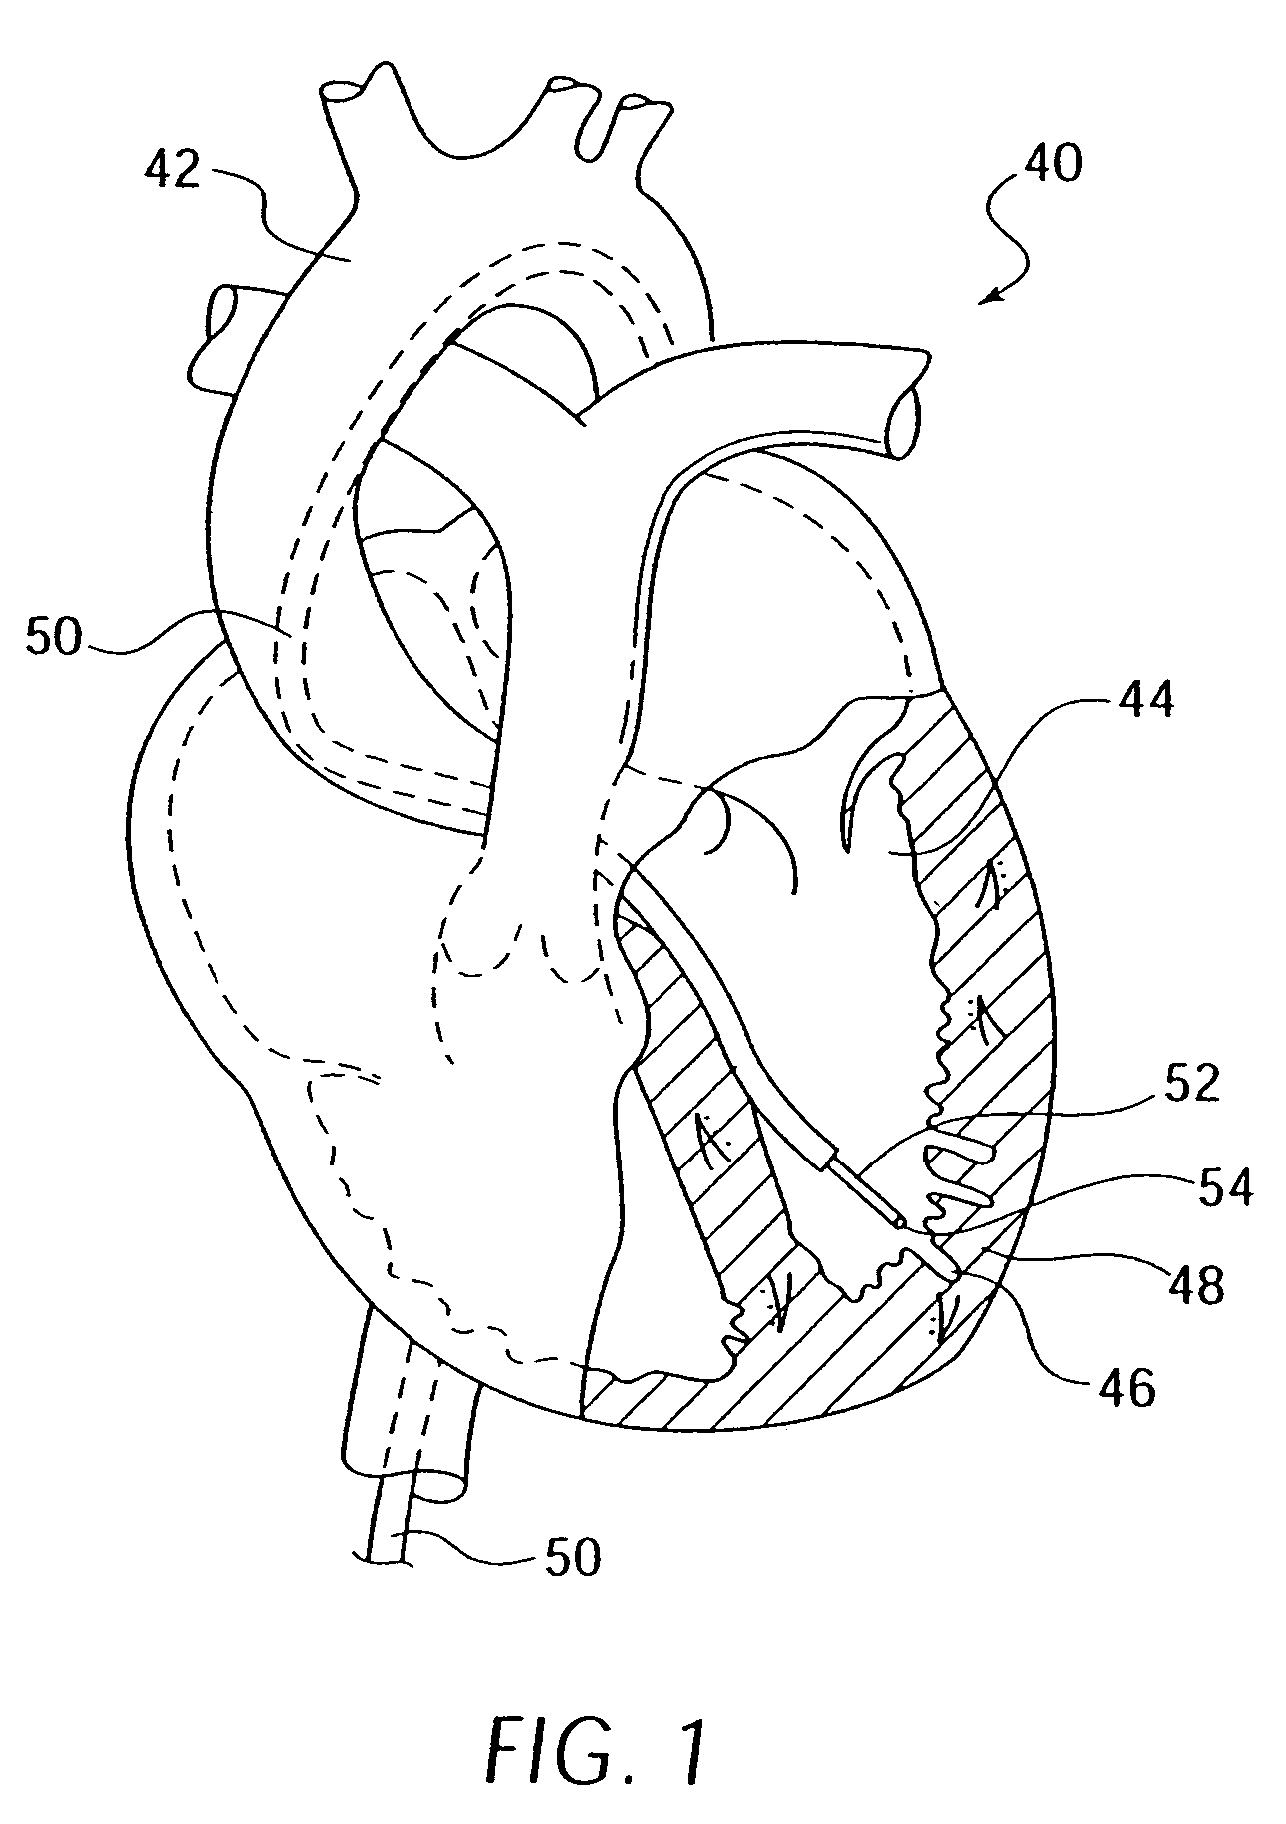 Elongated medical device with functional distal end